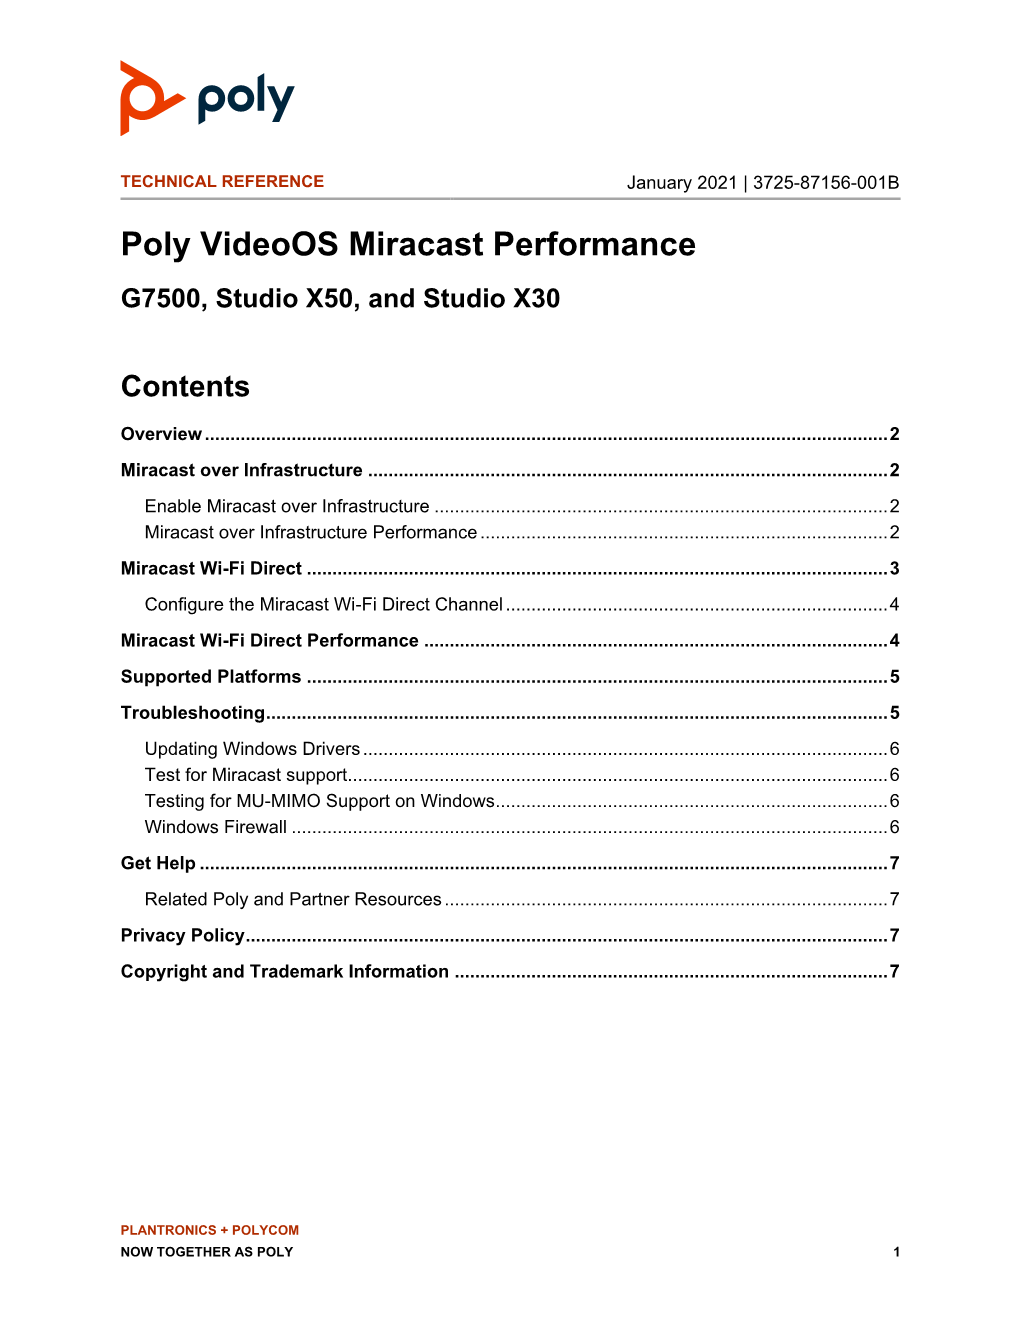 Poly Videoos Miracast Performance Technical Reference